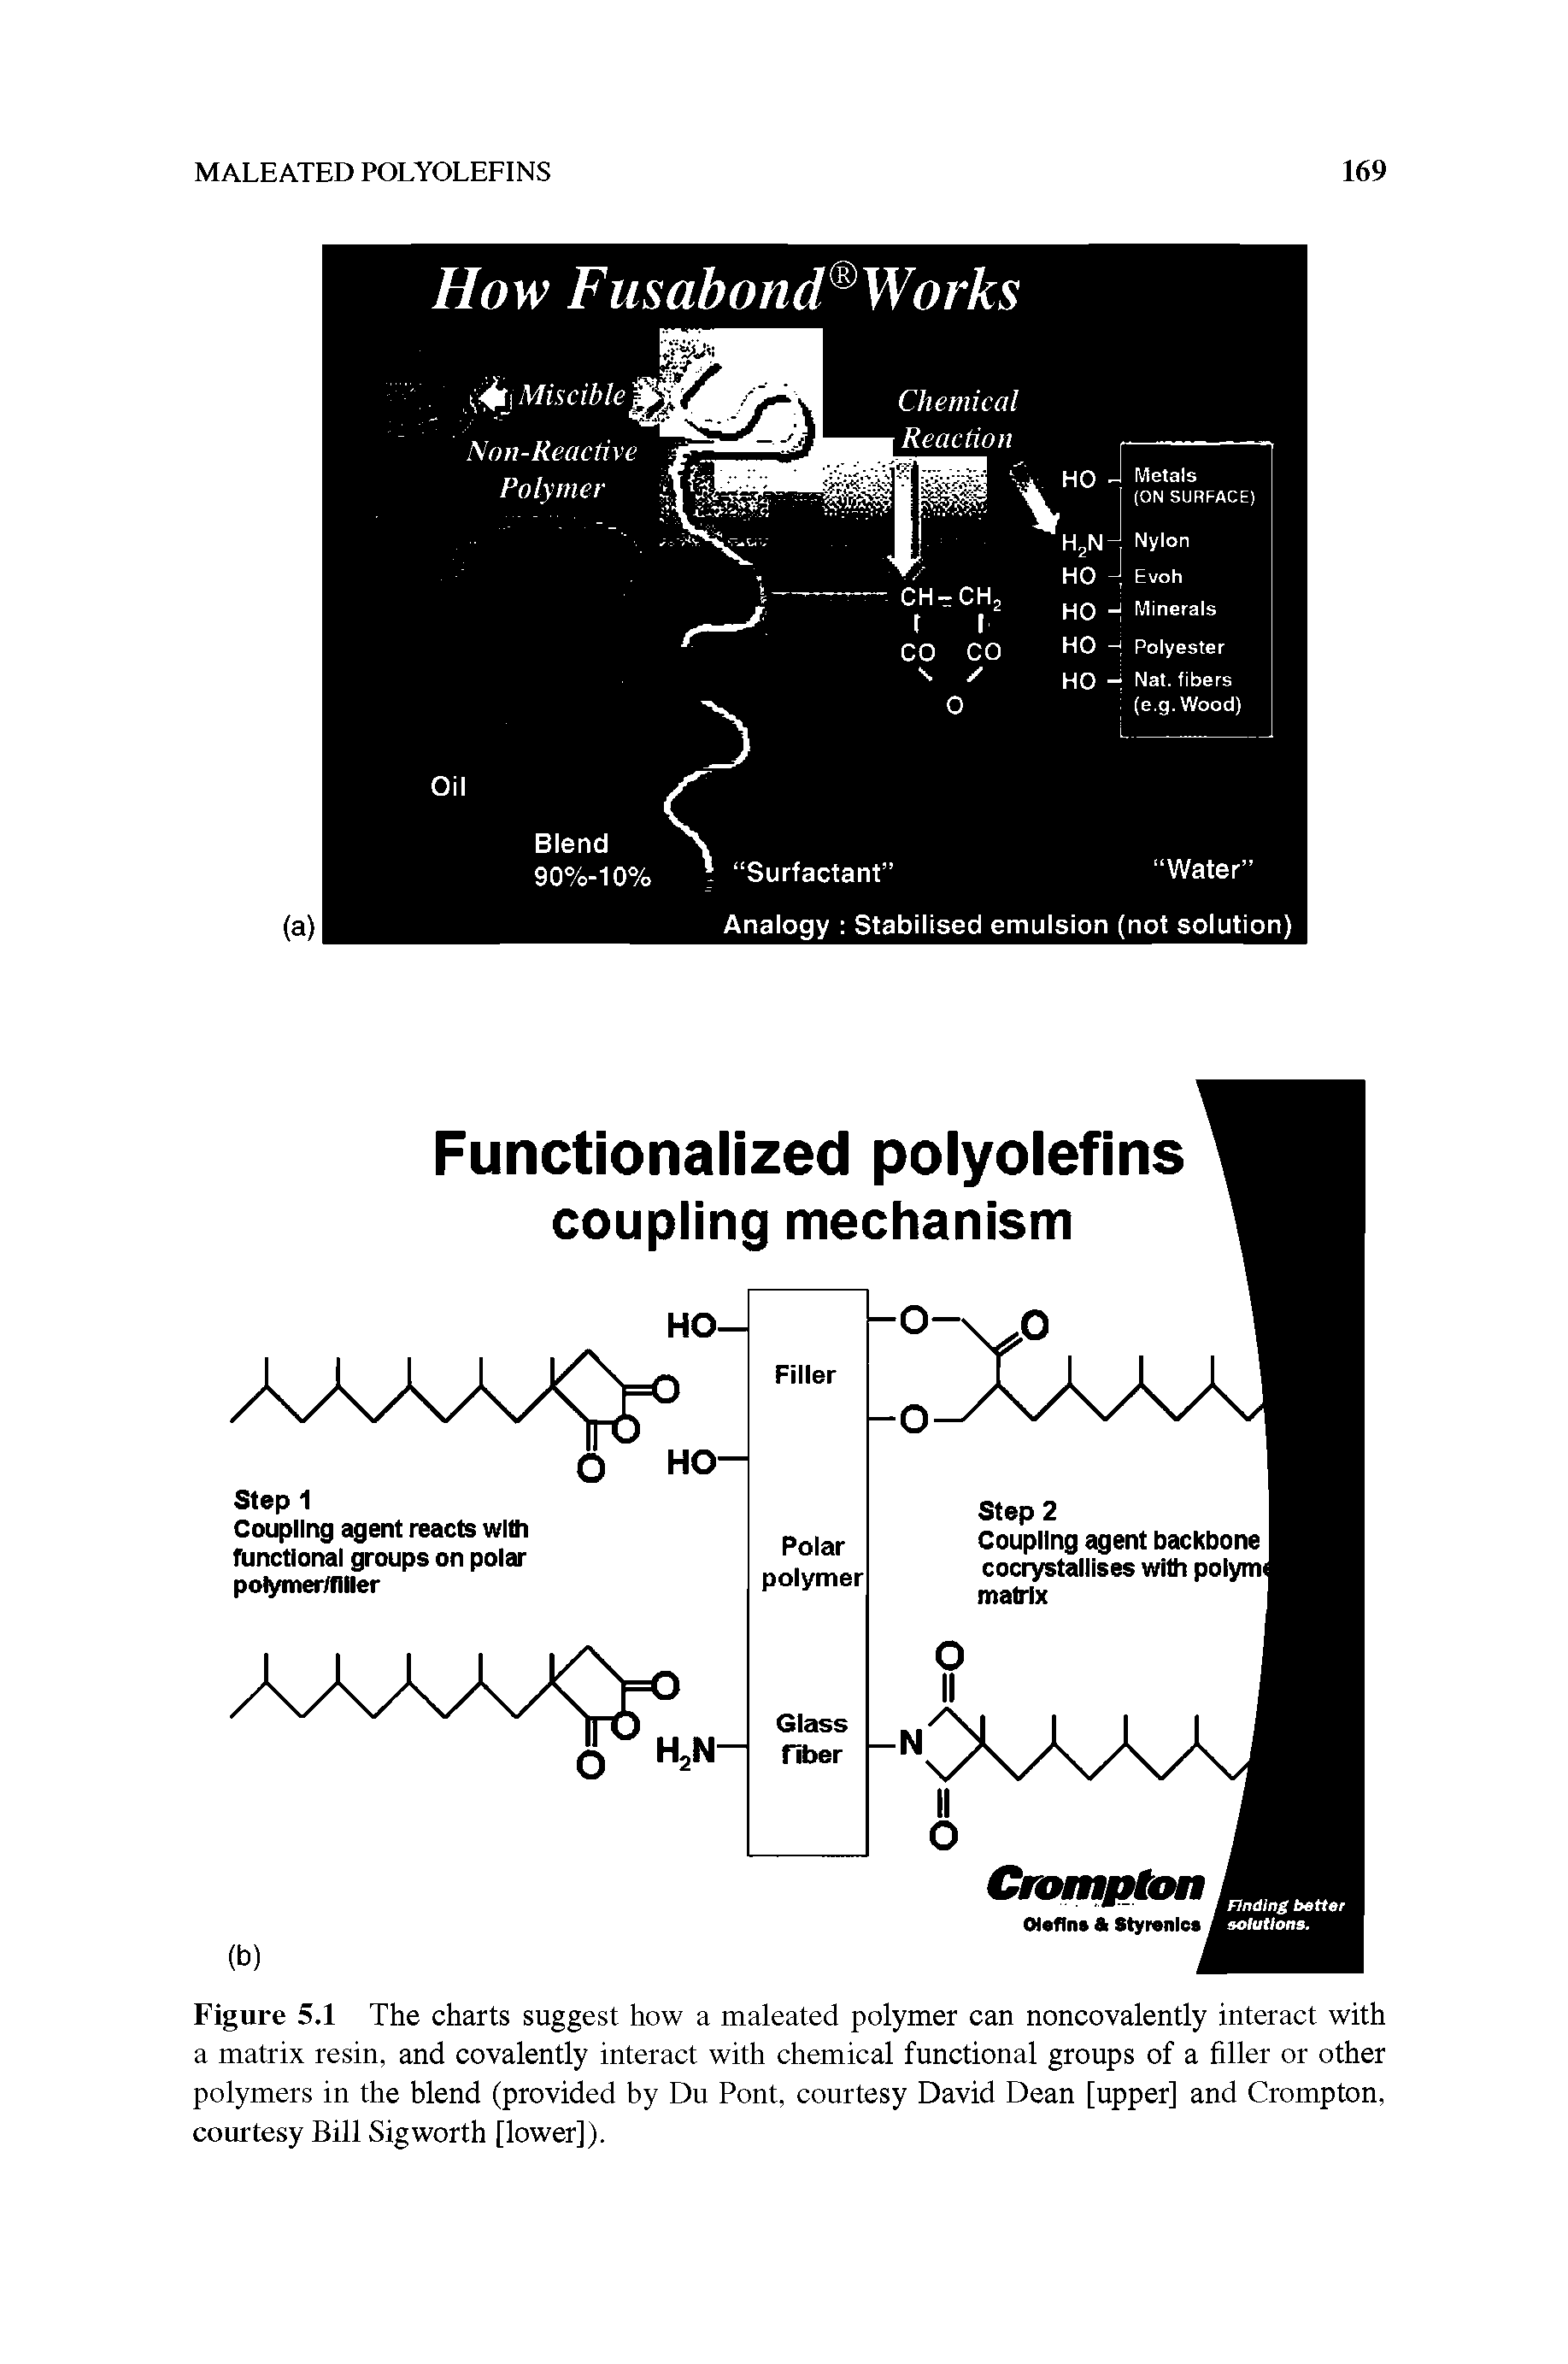 Figure 5.1 The charts suggest how a maleated polymer can noncovalently interact with a matrix resin, and covalently interact with chemical functional groups of a filler or other polymers in the blend (provided by Du Pont, courtesy David Dean [upper] and Crompton, courtesy Bill Sigworth [lower]).